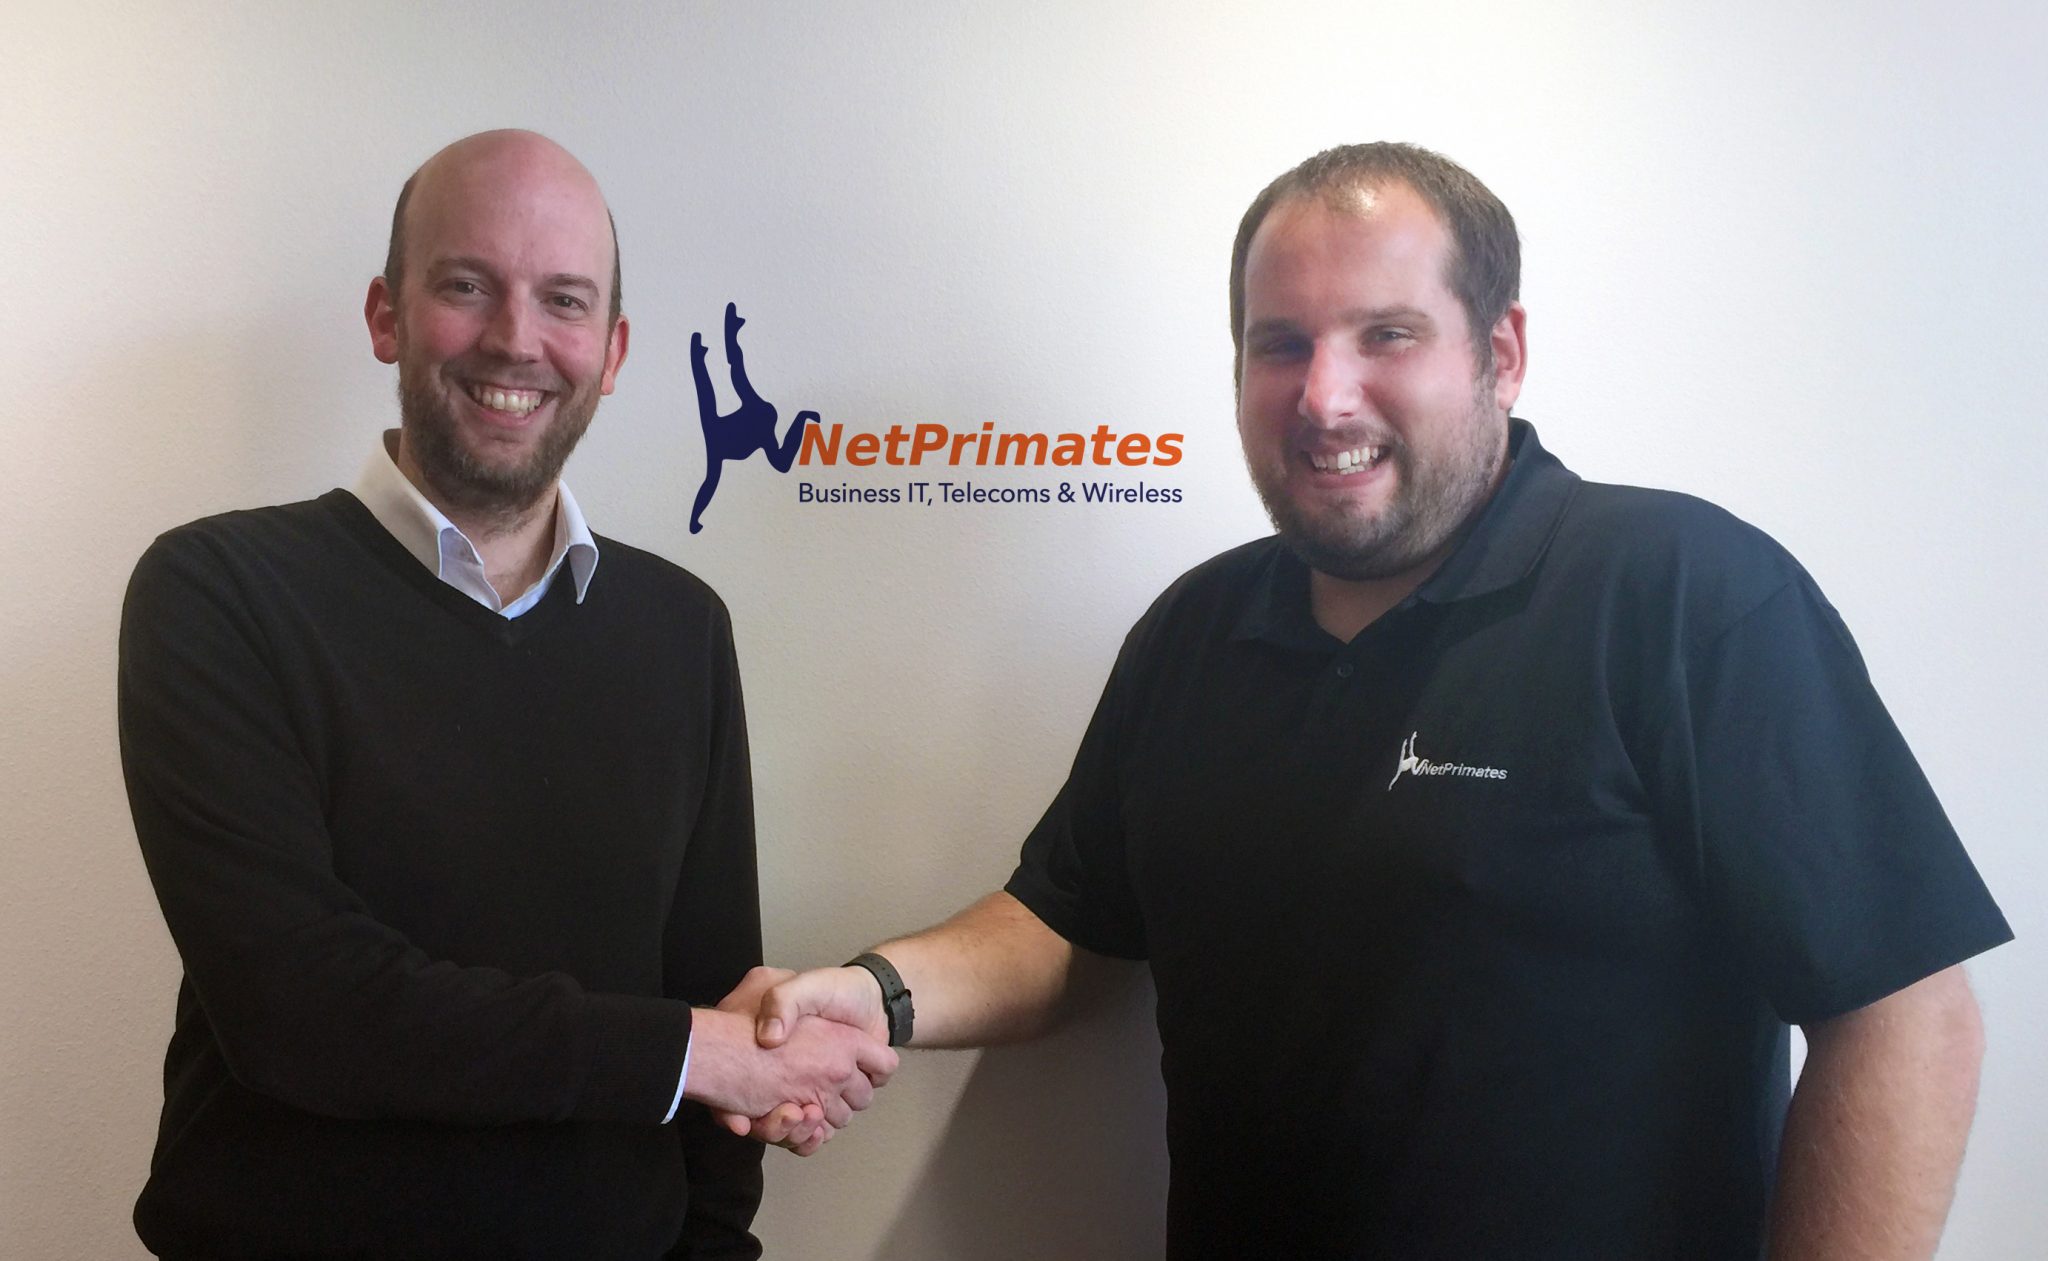 Rupert and Steve from Net Primates shaking hands.